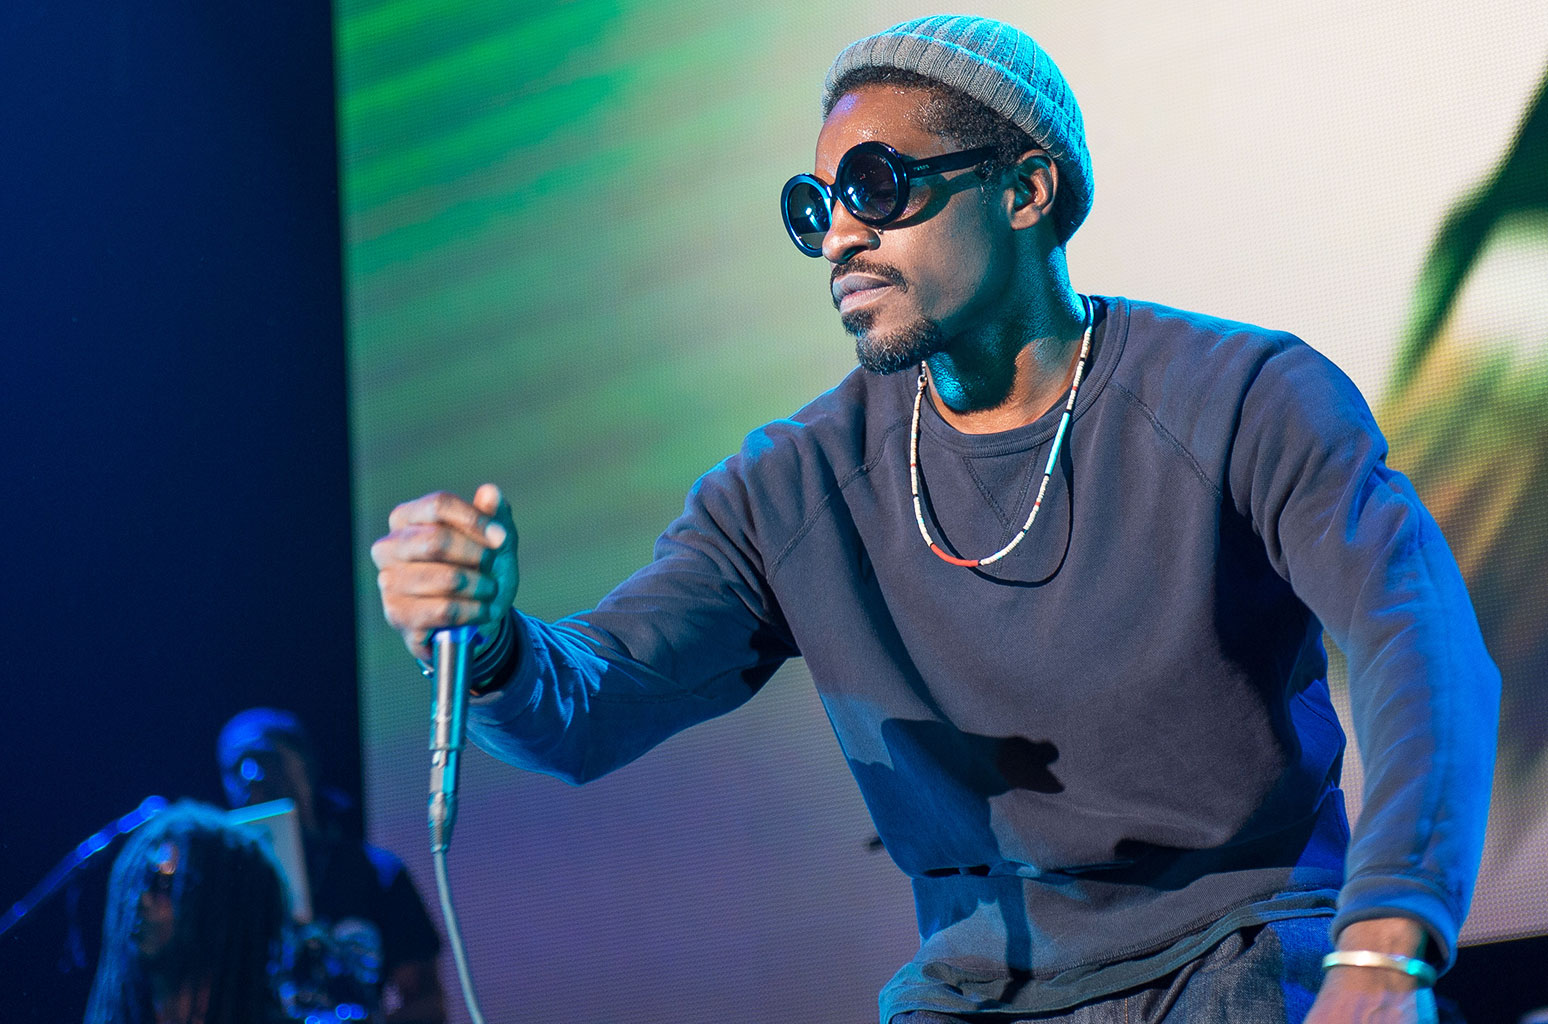 Andre 3000 Says He Hasn't Been Making Much Music, Cites Lack of Confidence &amp; Motivation - www.billboard.com